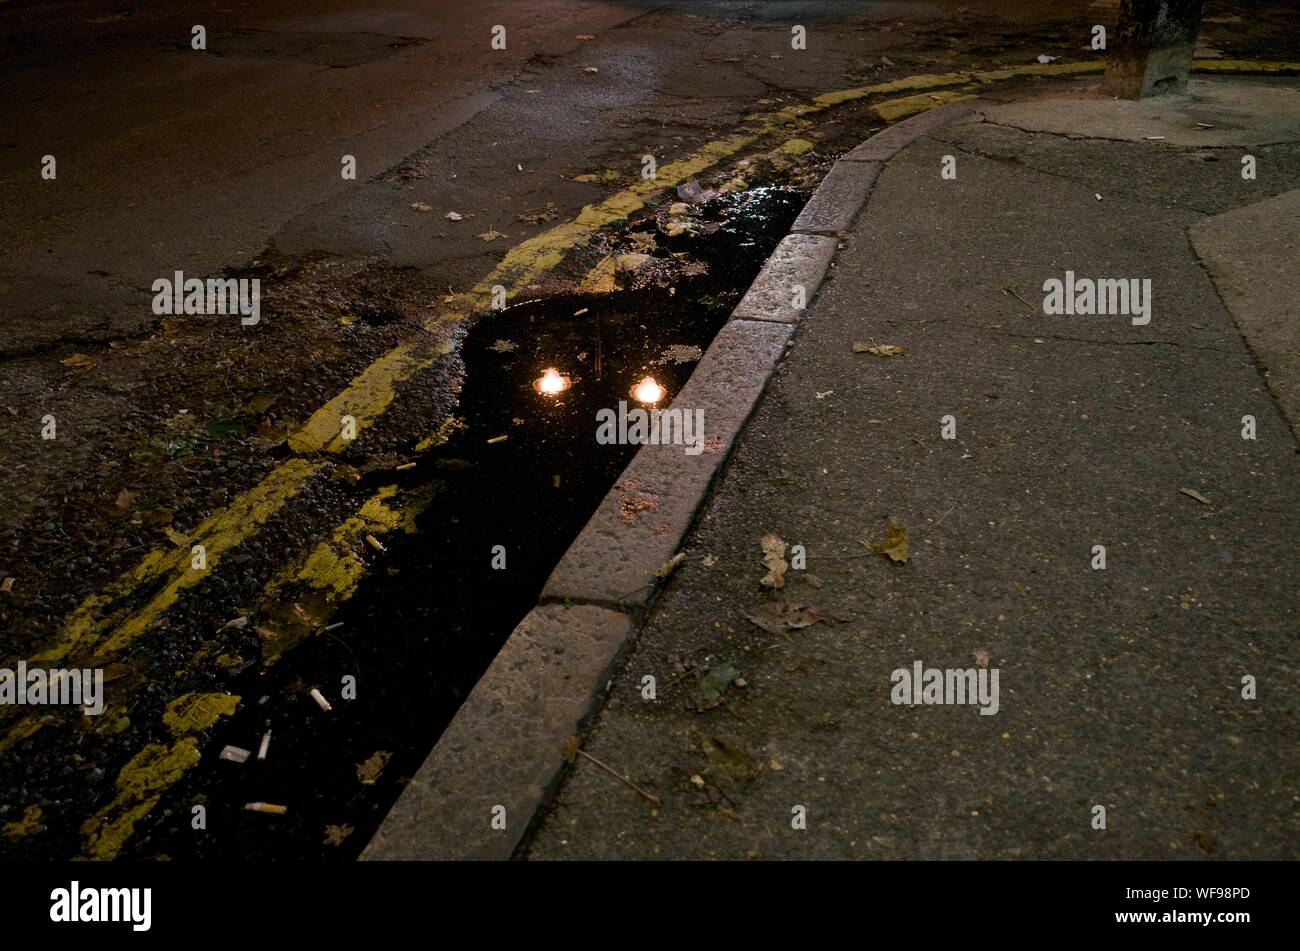 View Of Sidewalk With Dirty Water Stock Photo